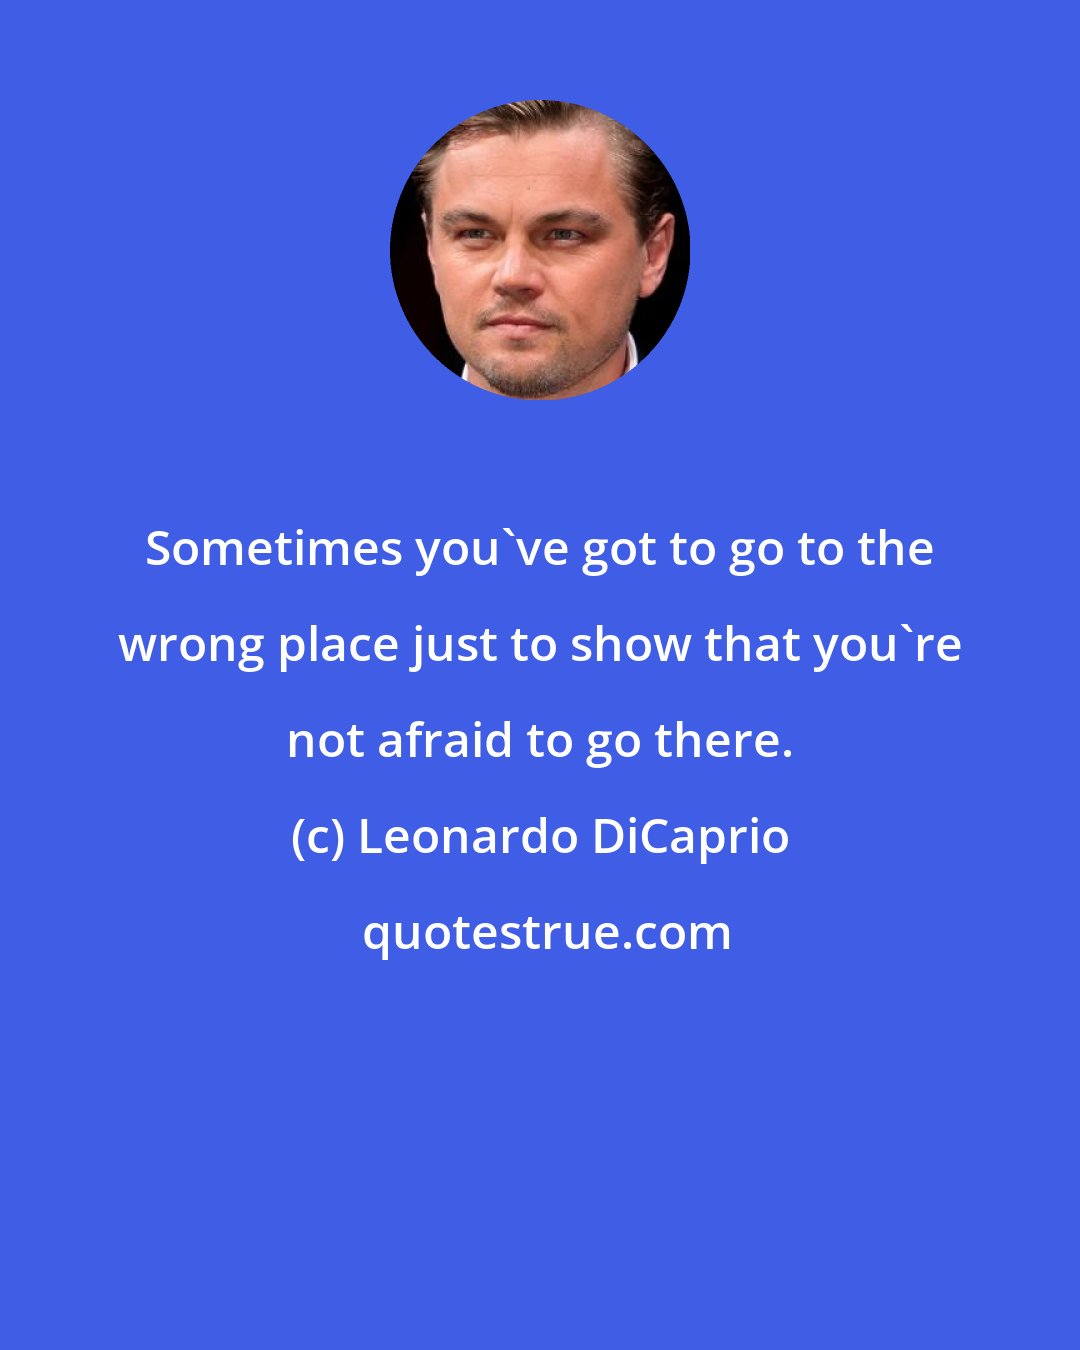 Leonardo DiCaprio: Sometimes you've got to go to the wrong place just to show that you're not afraid to go there.